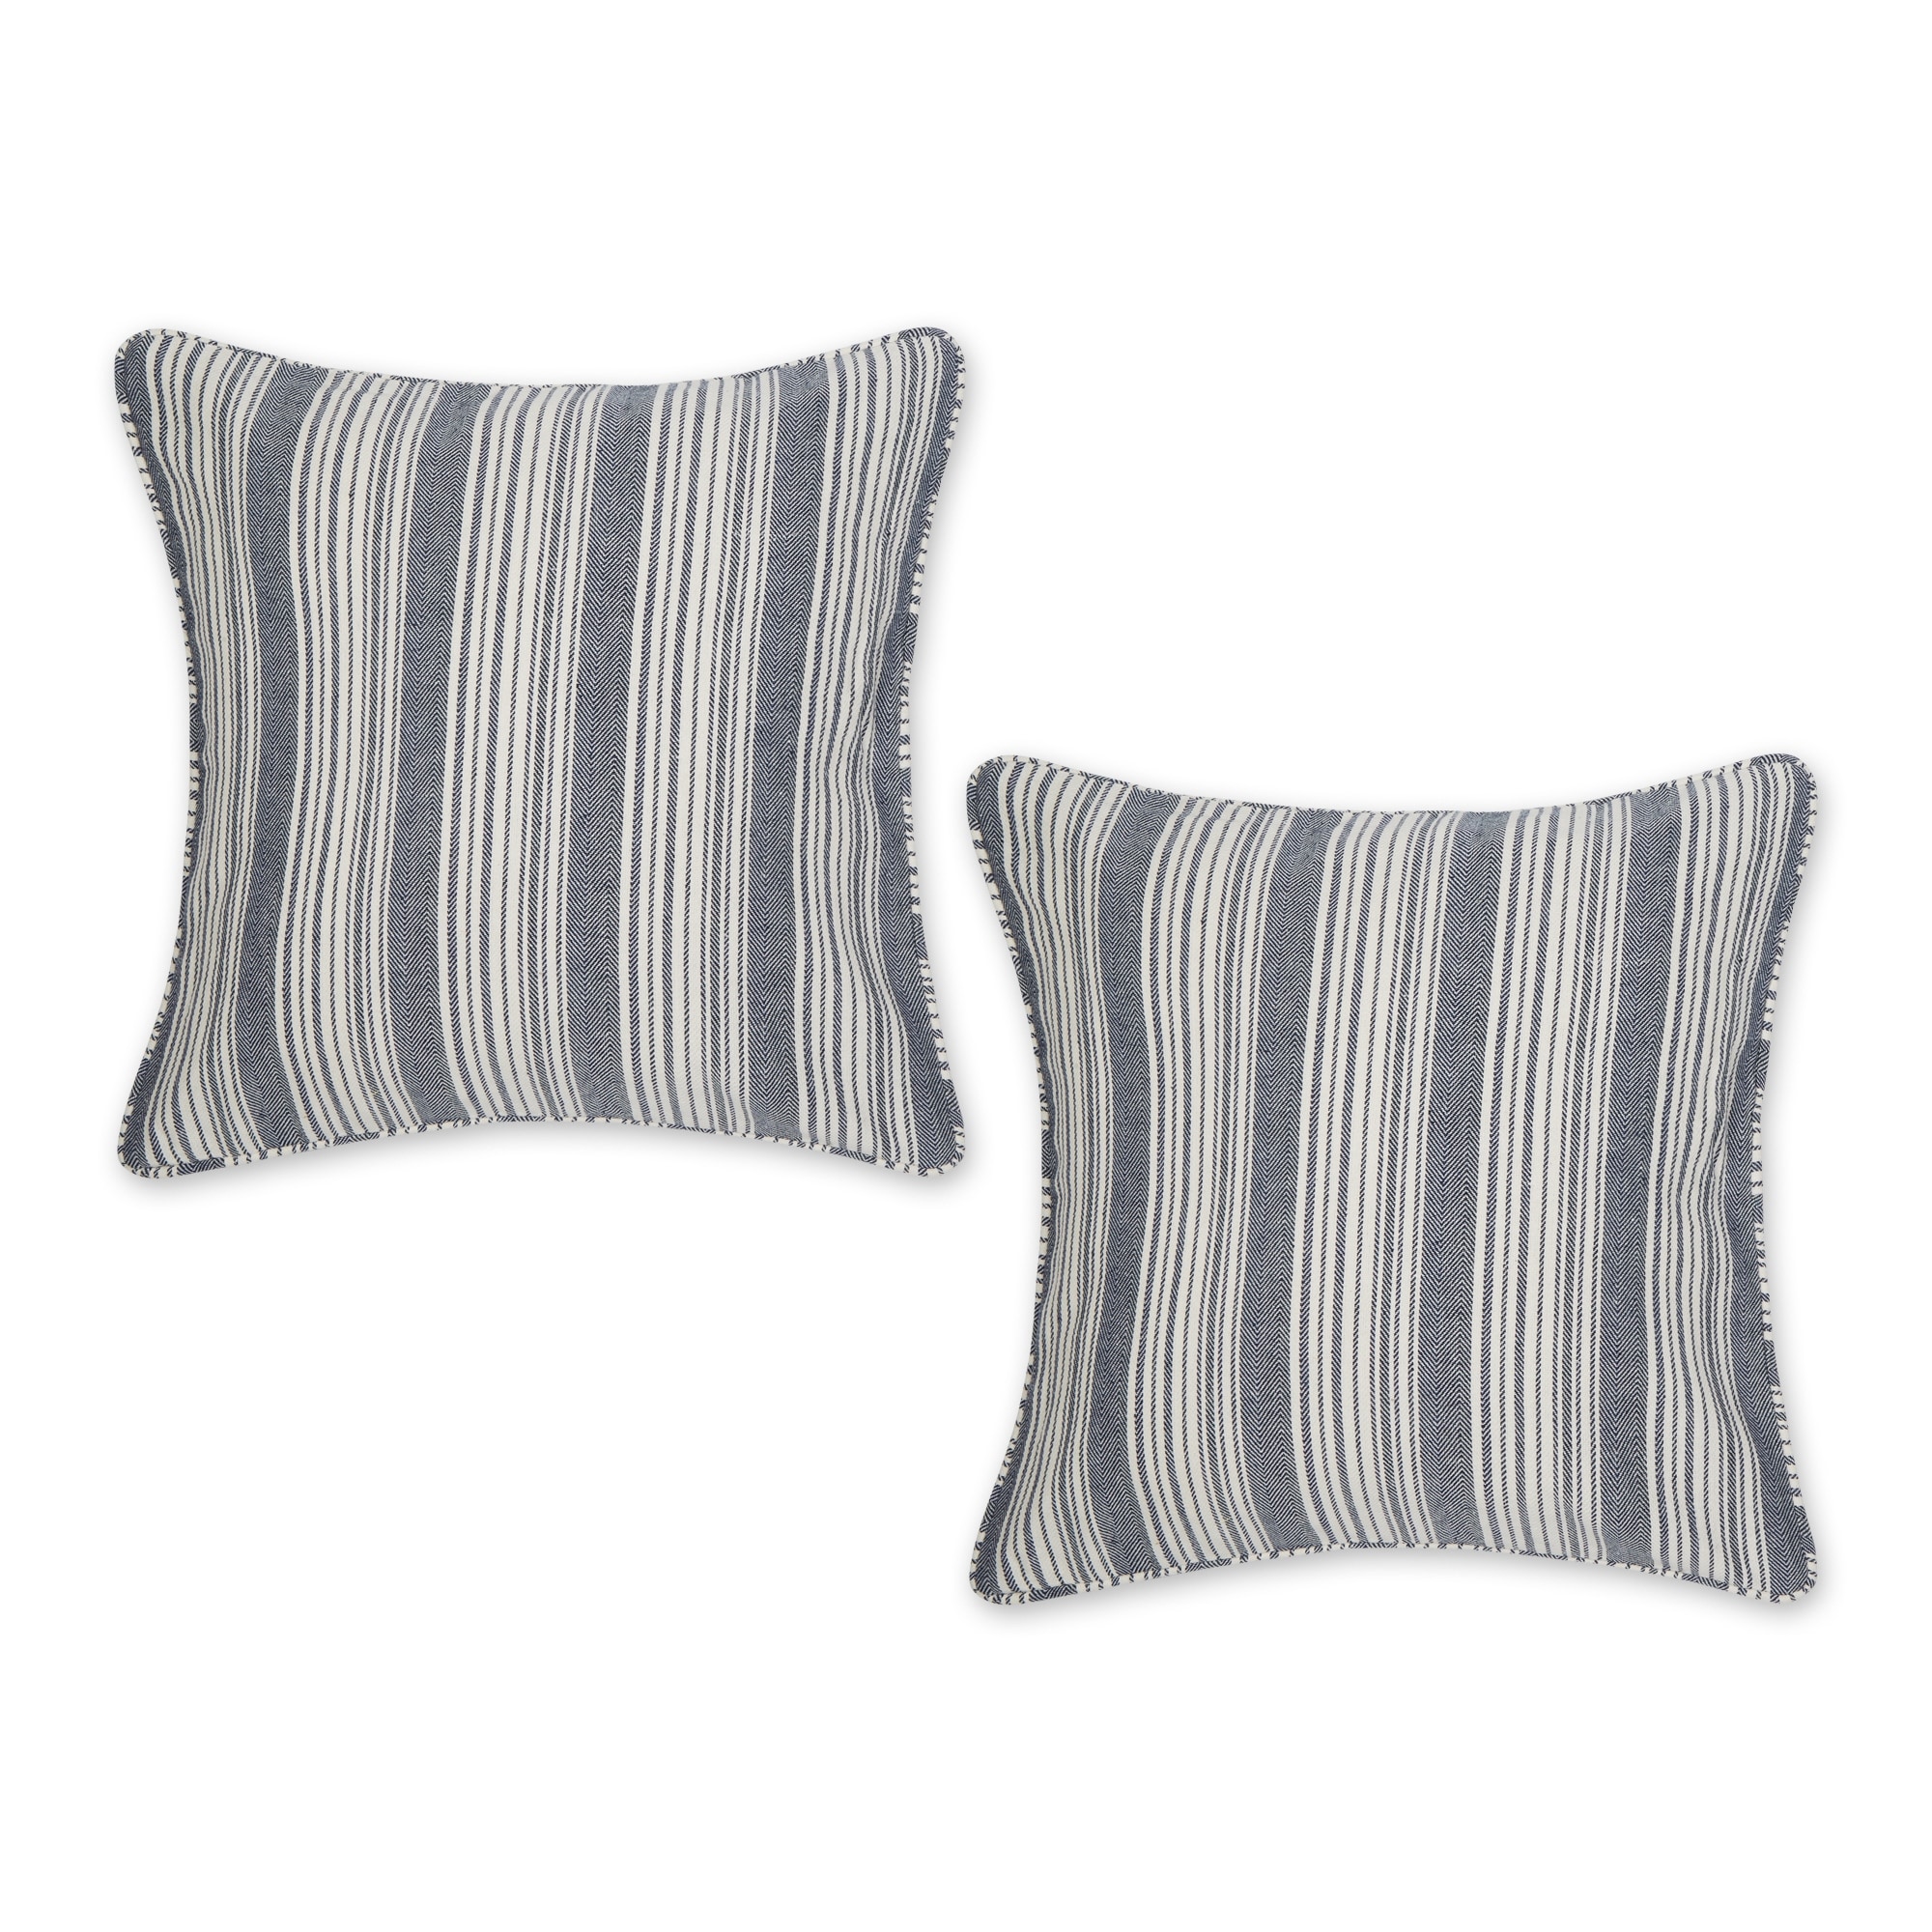 https://ak1.ostkcdn.com/images/products/is/images/direct/a65eb929bbd9575fde83e417411425c3f5a6f9c6/Navy-Herringbone-Stripe-Recycled-Cotton-Pillow-Cover-18x18-%28Set-of-2%29.jpg